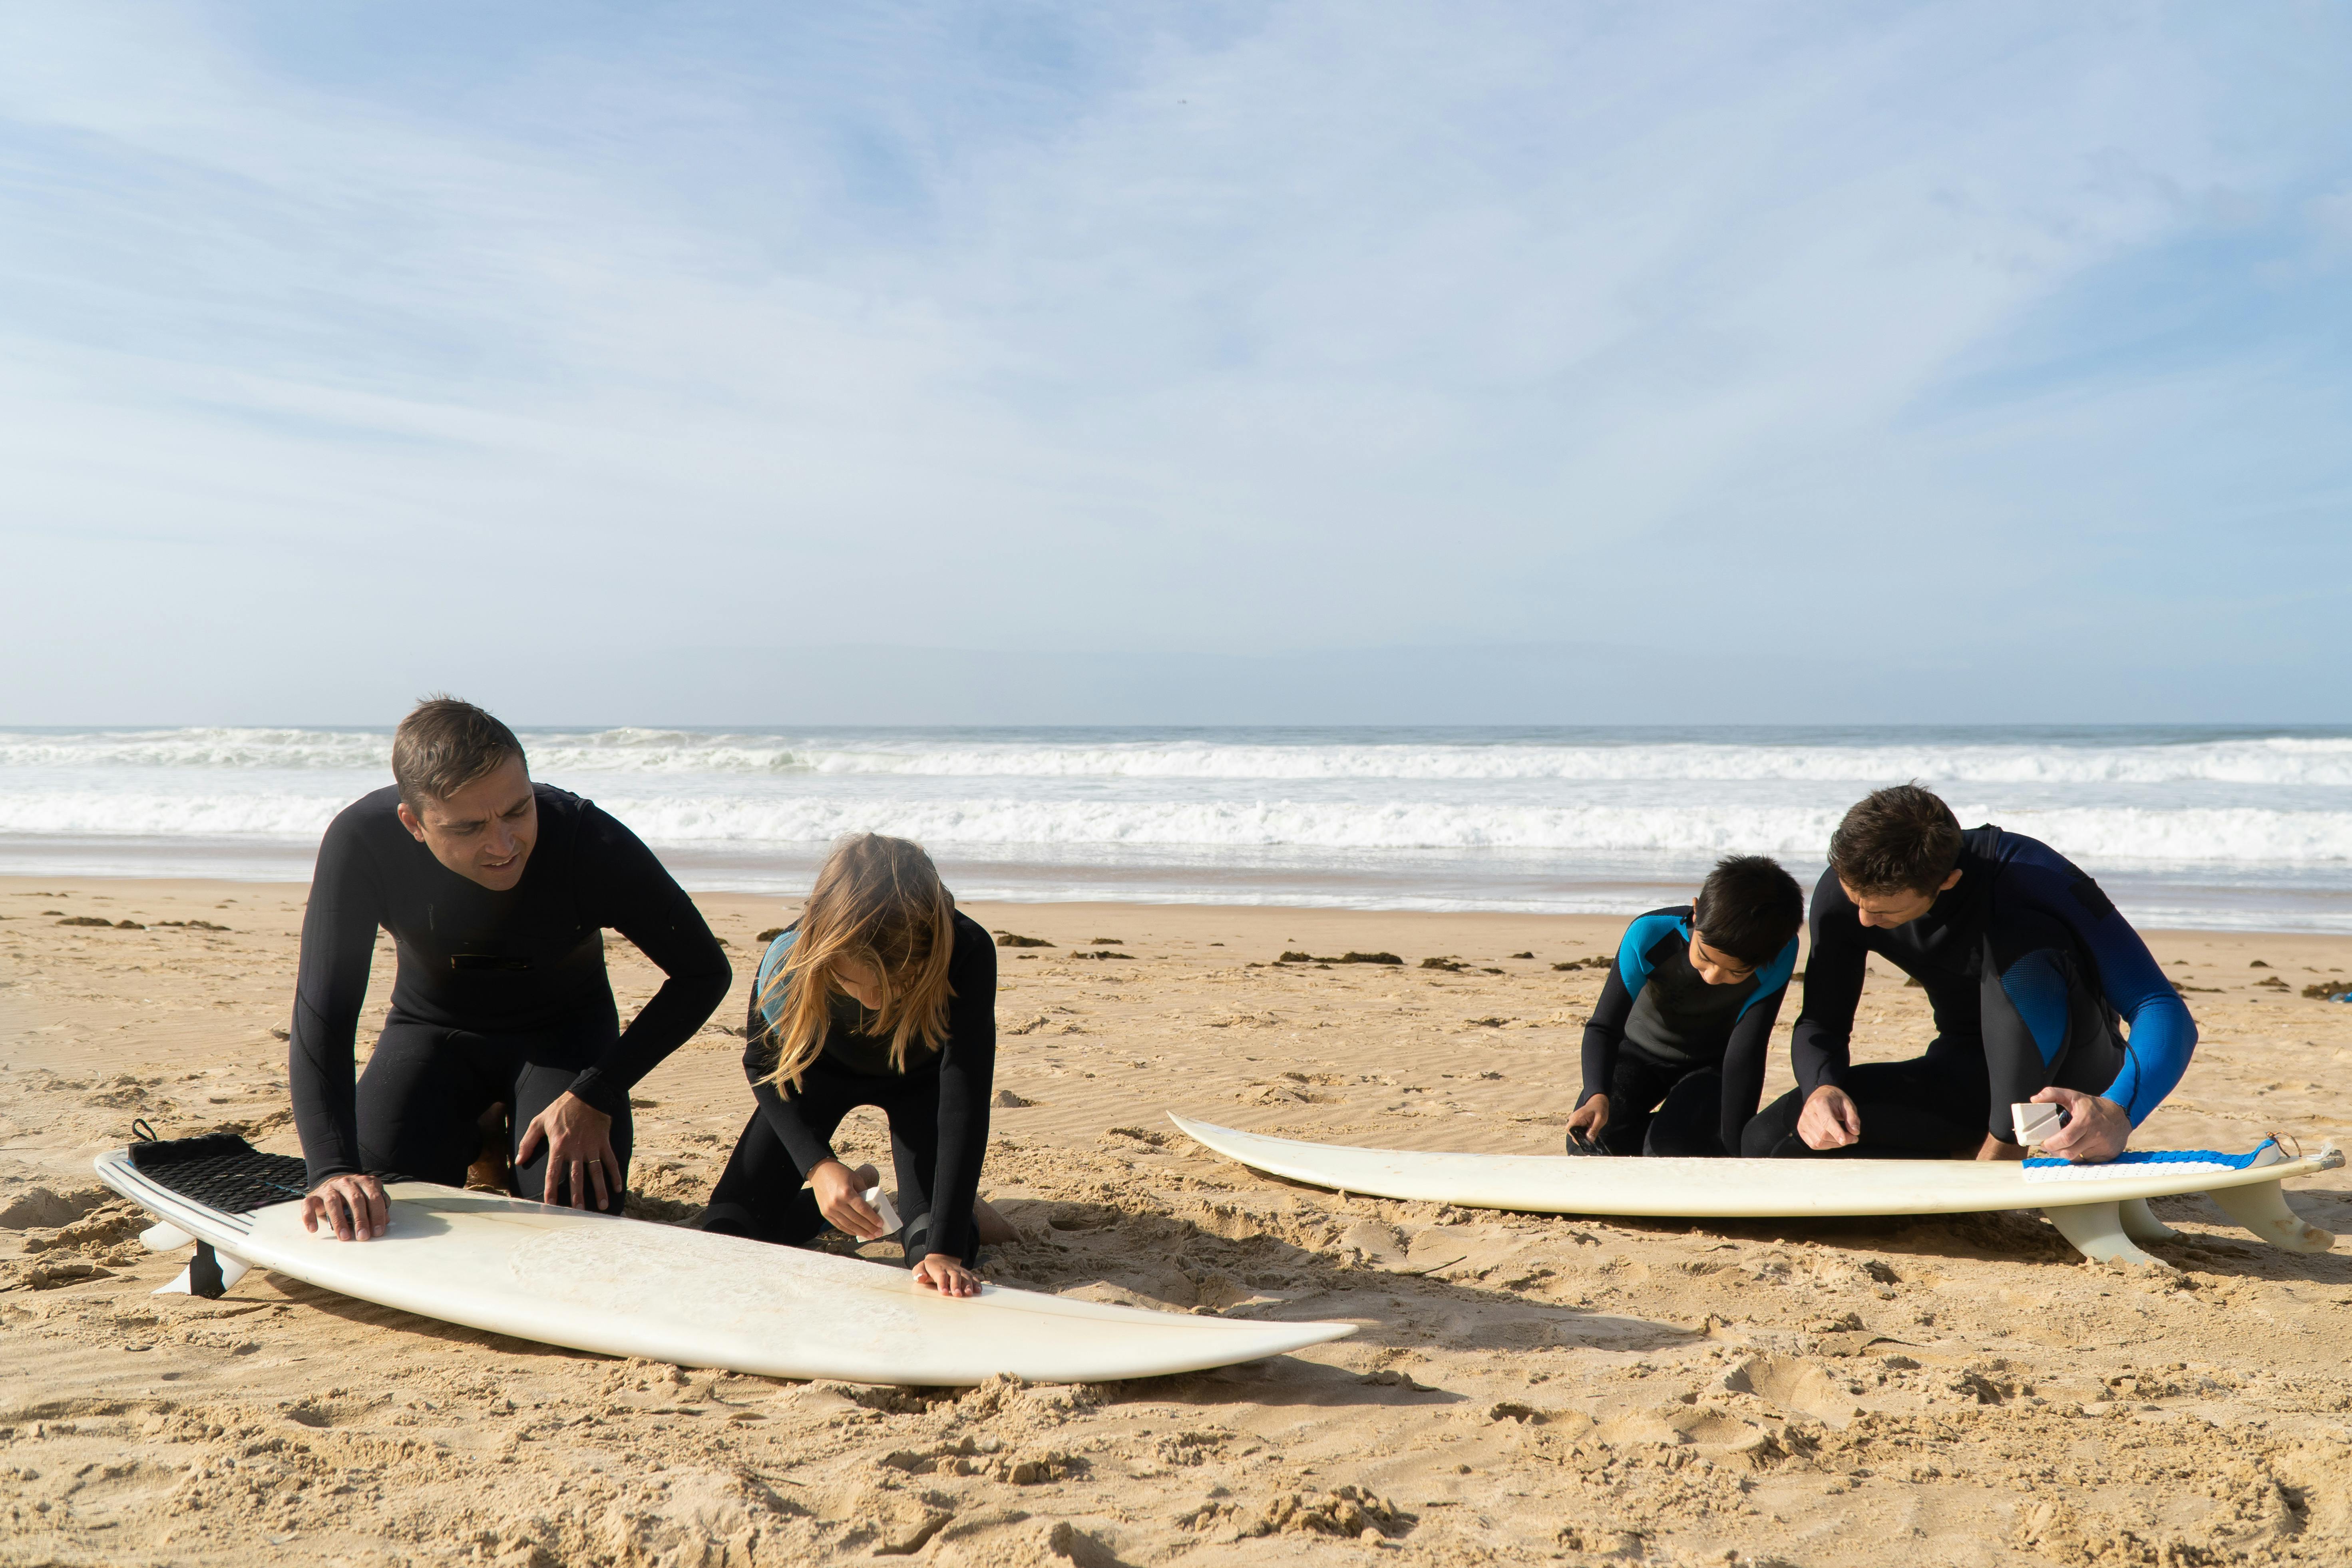 Surf Photos: Download Cool Free Stock Images of Surfers